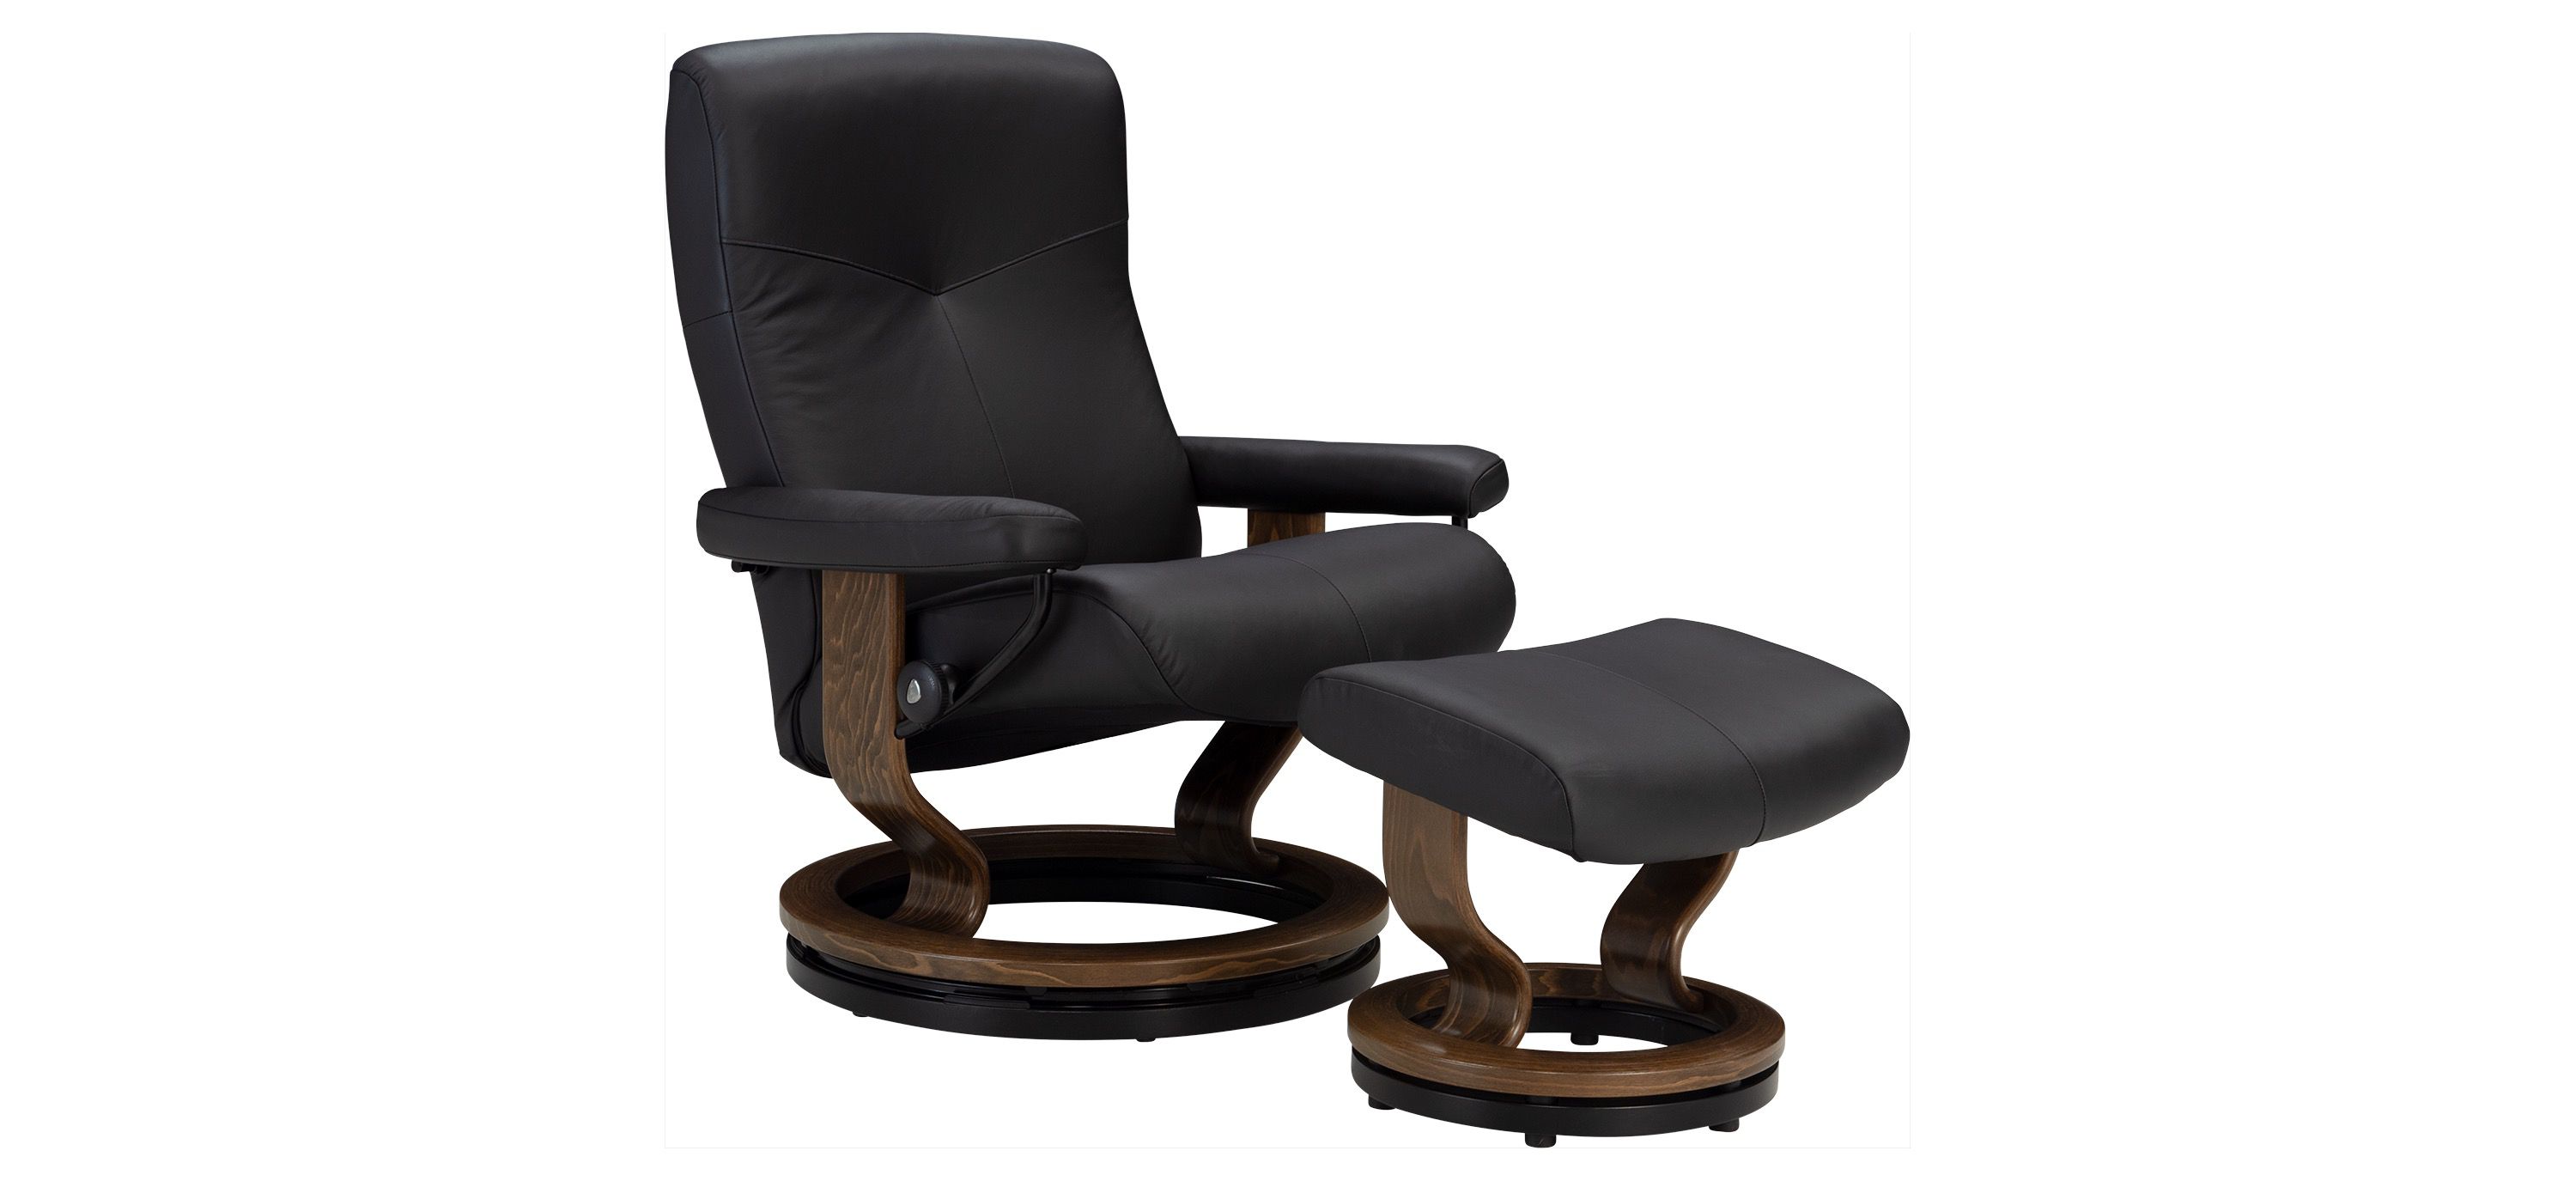 Stressless Dover Large Chair w/ Ottoman